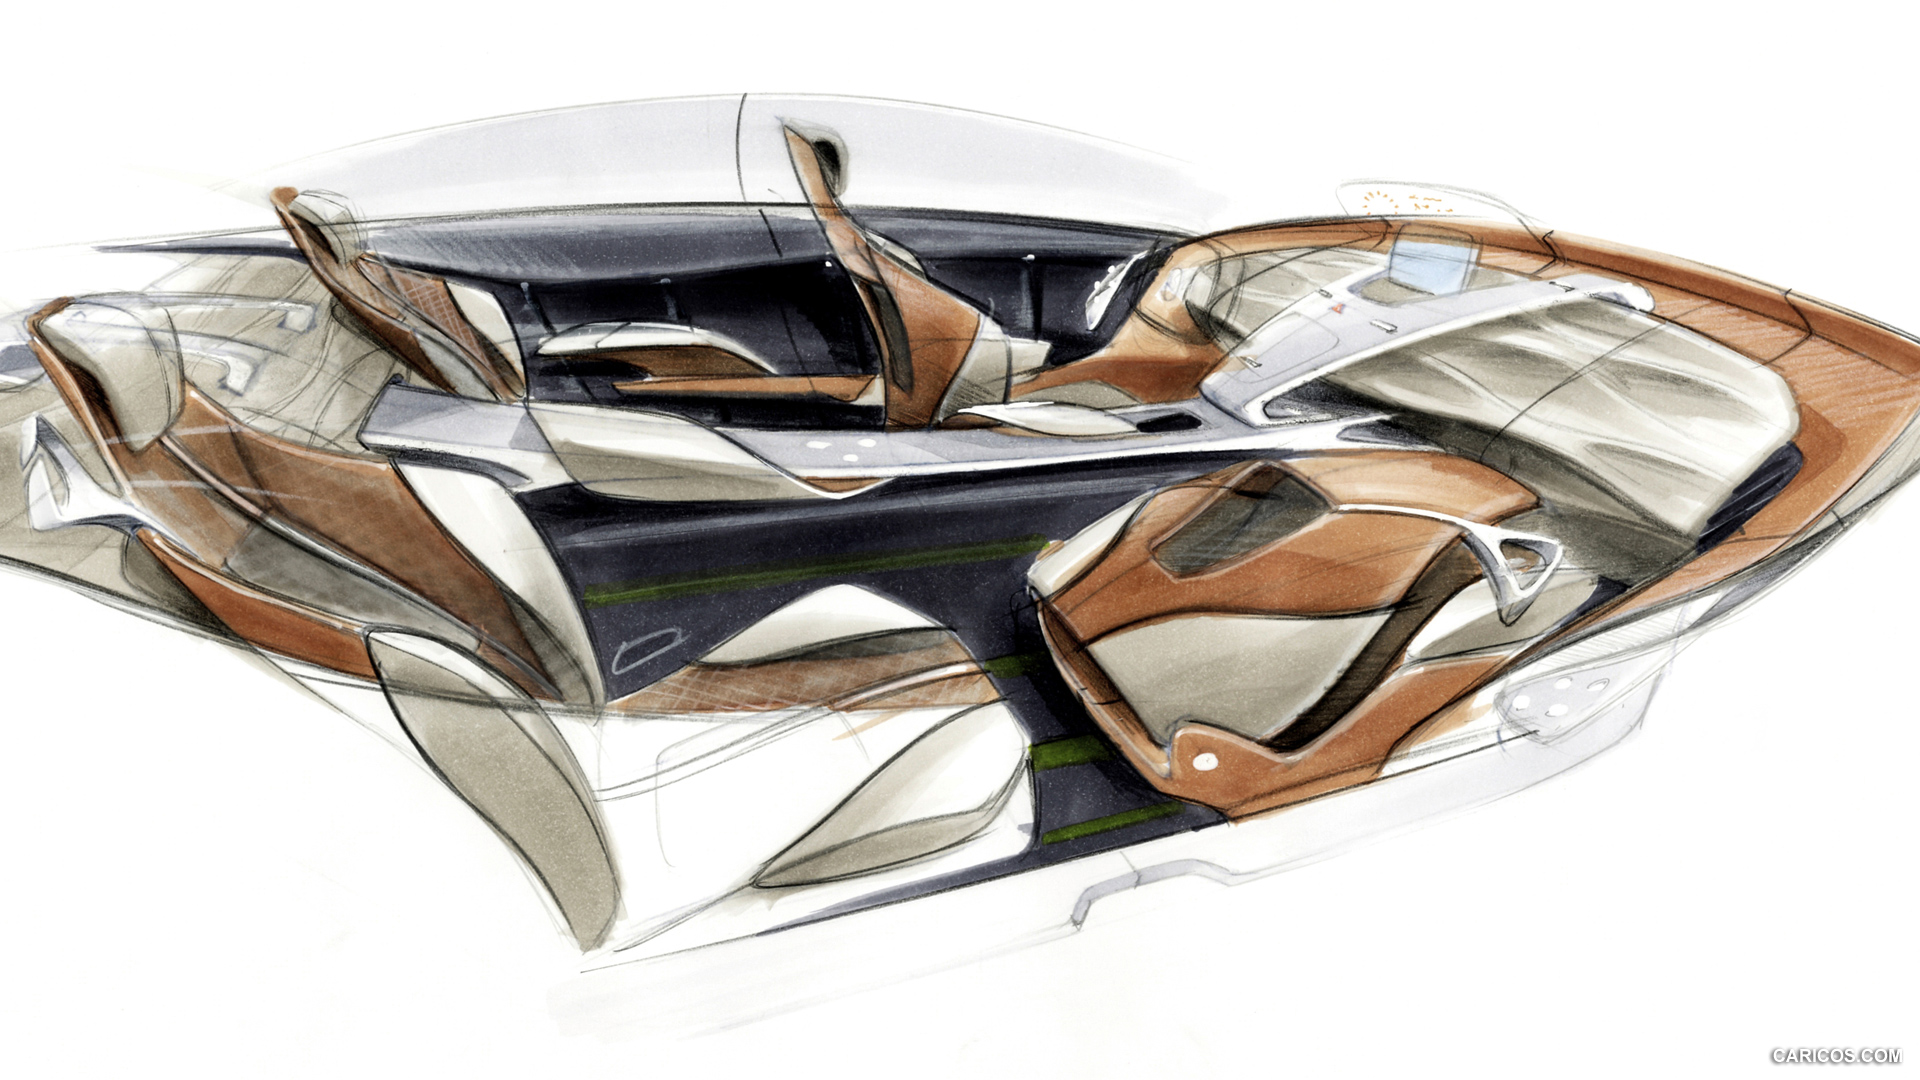 Mercedes-Benz F800 Style Concept (2010)  - Design Sketch, #116 of 120